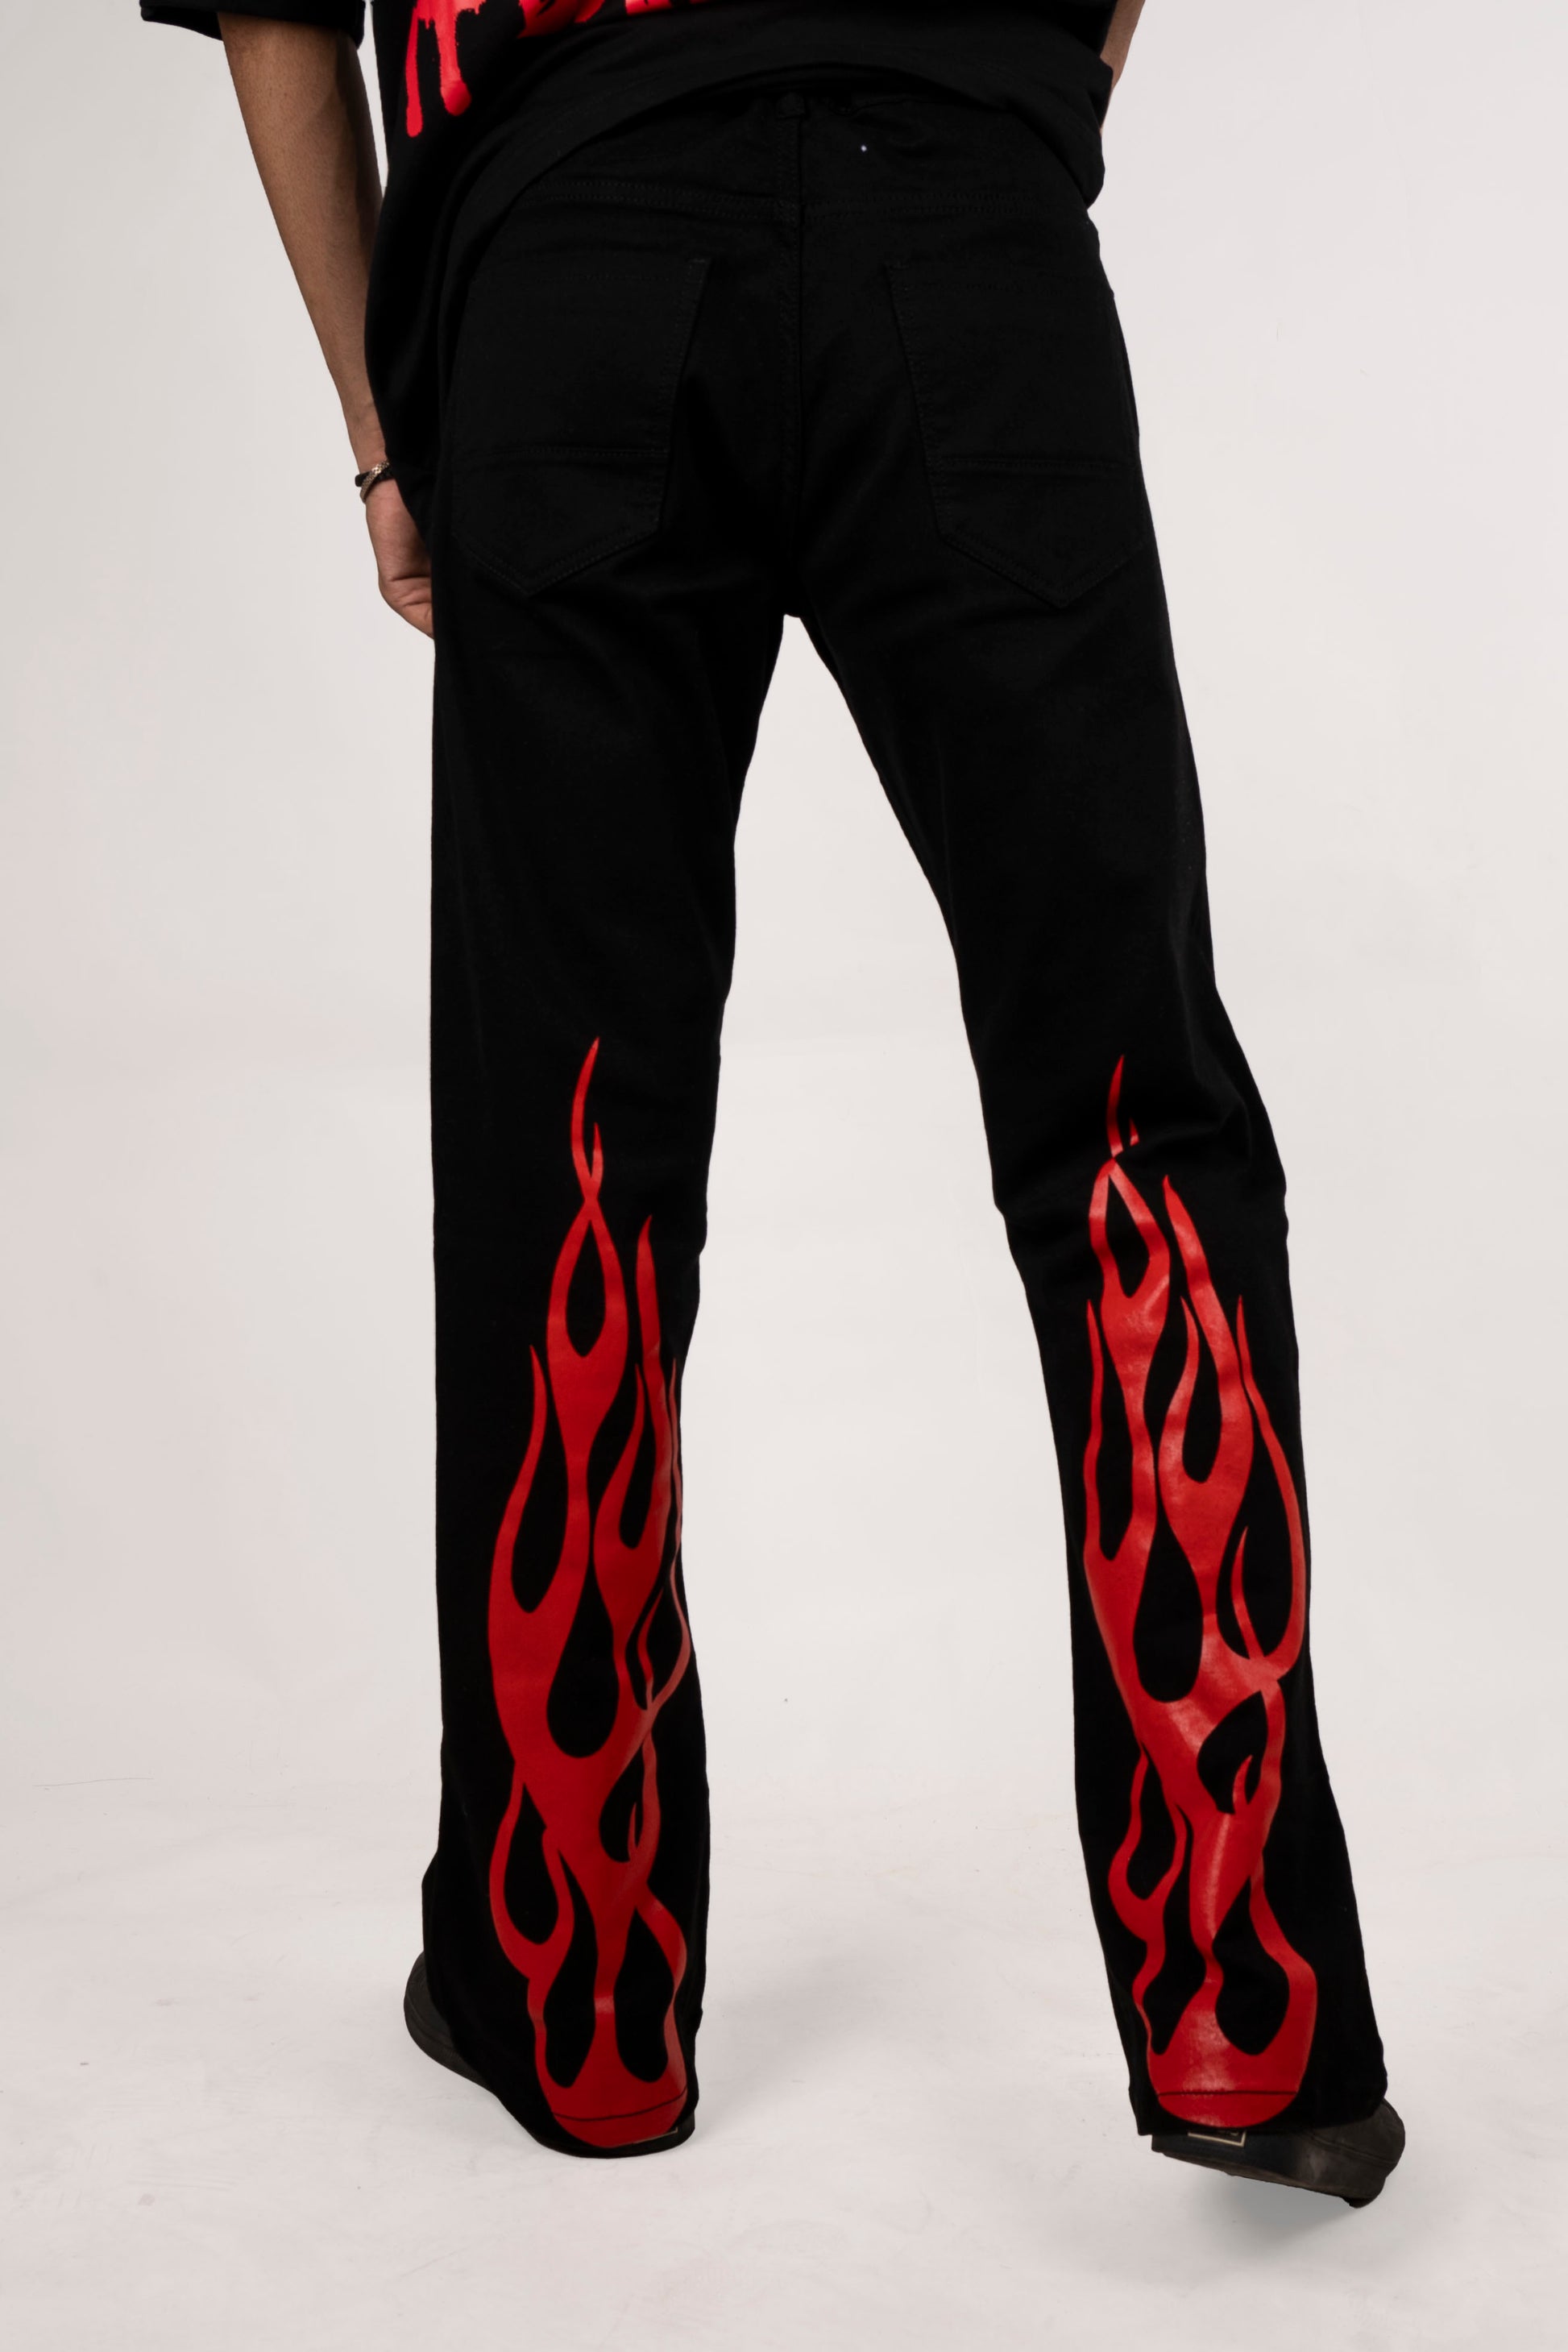 No Excuse Pant Red 26 / Black/Red Stitch